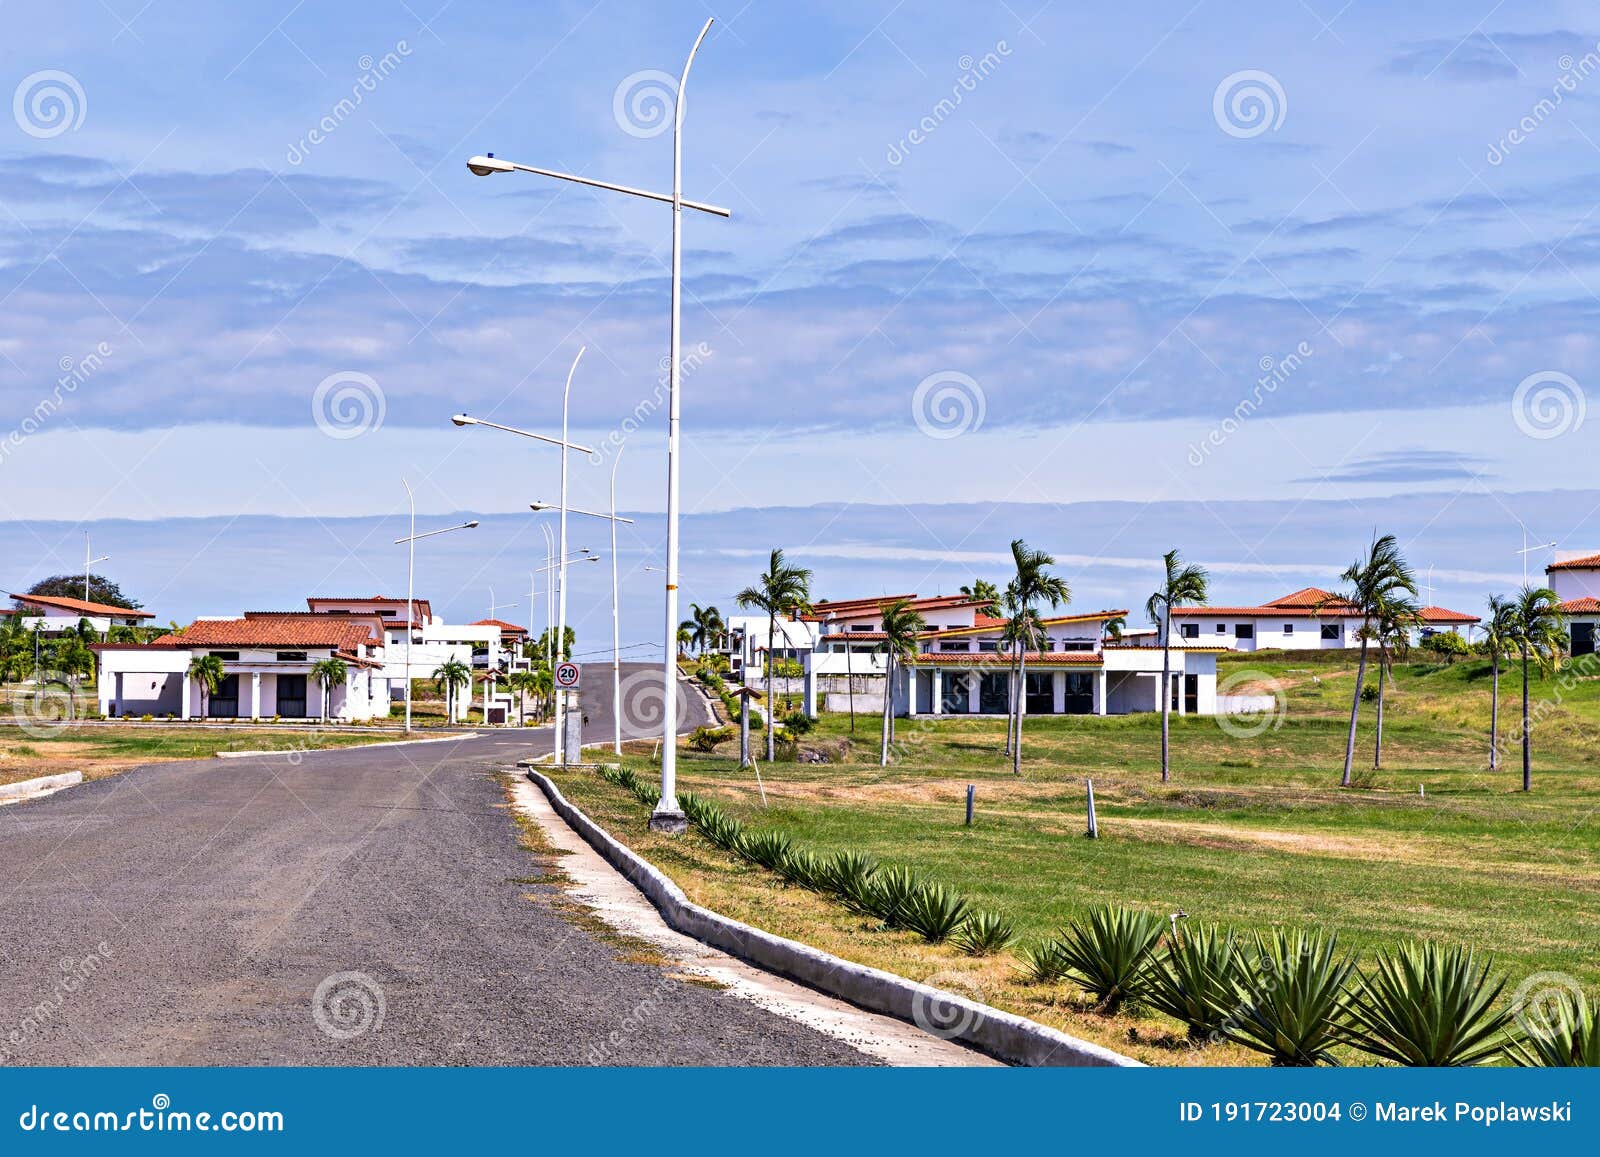 the houses in the expatÃ¢â¬â¢s community project near las tablas in panama